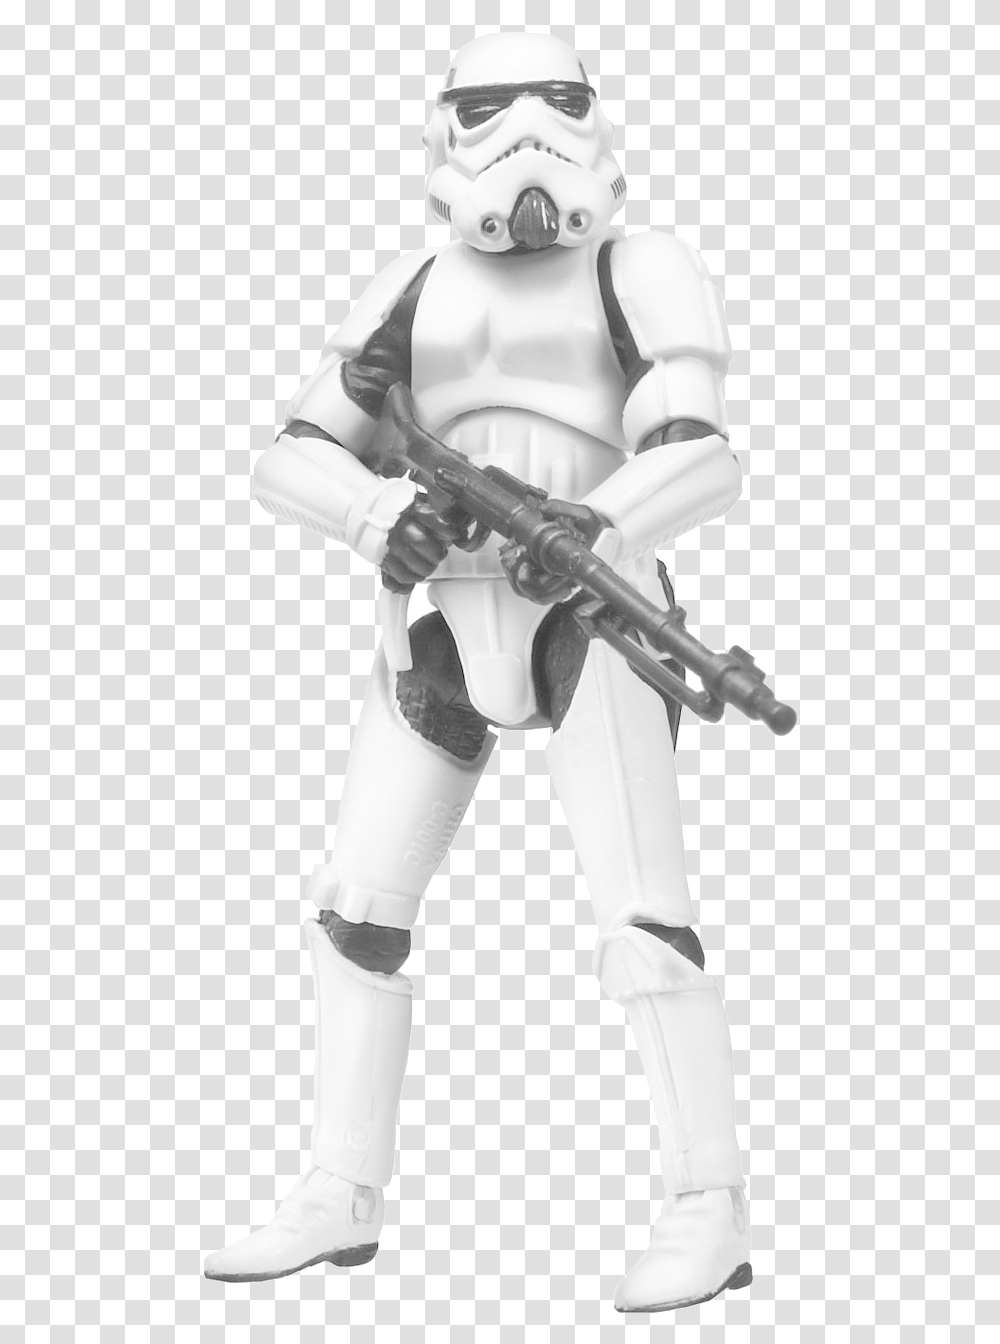 Stormtrooper Star Wars Hasbro 2011, Person, Figurine, Hand, People Transparent Png